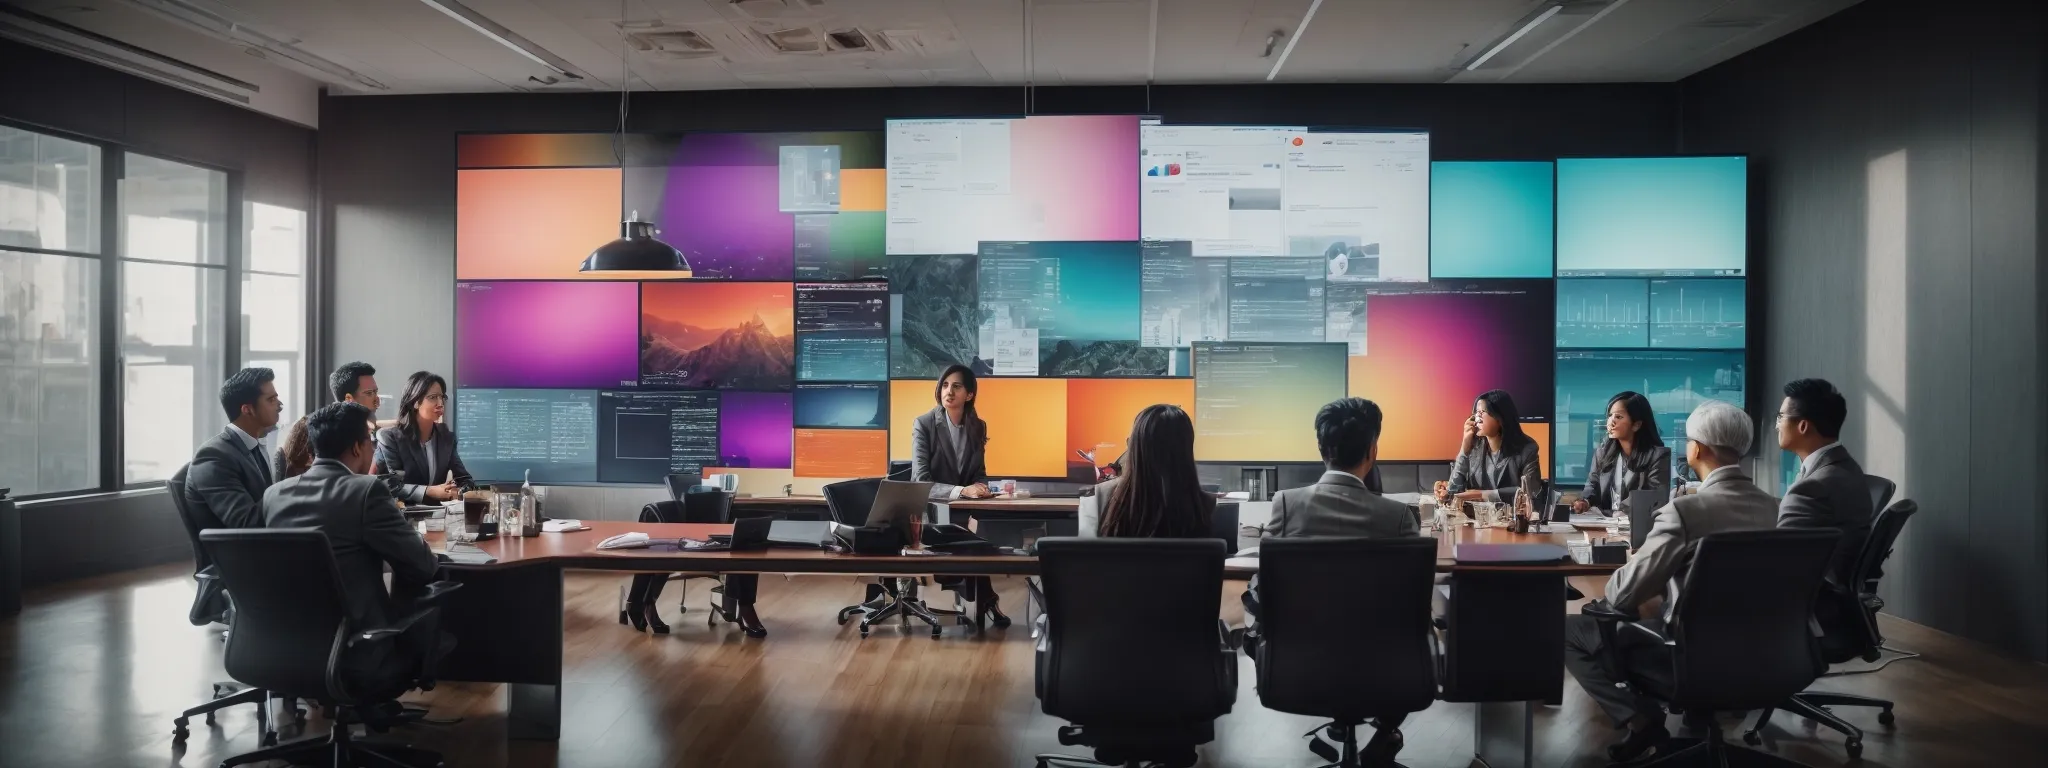 a dynamic team convenes around a conference table, brainstorming and strategizing over their social media marketing plan with a large screen displaying colorful analytics.